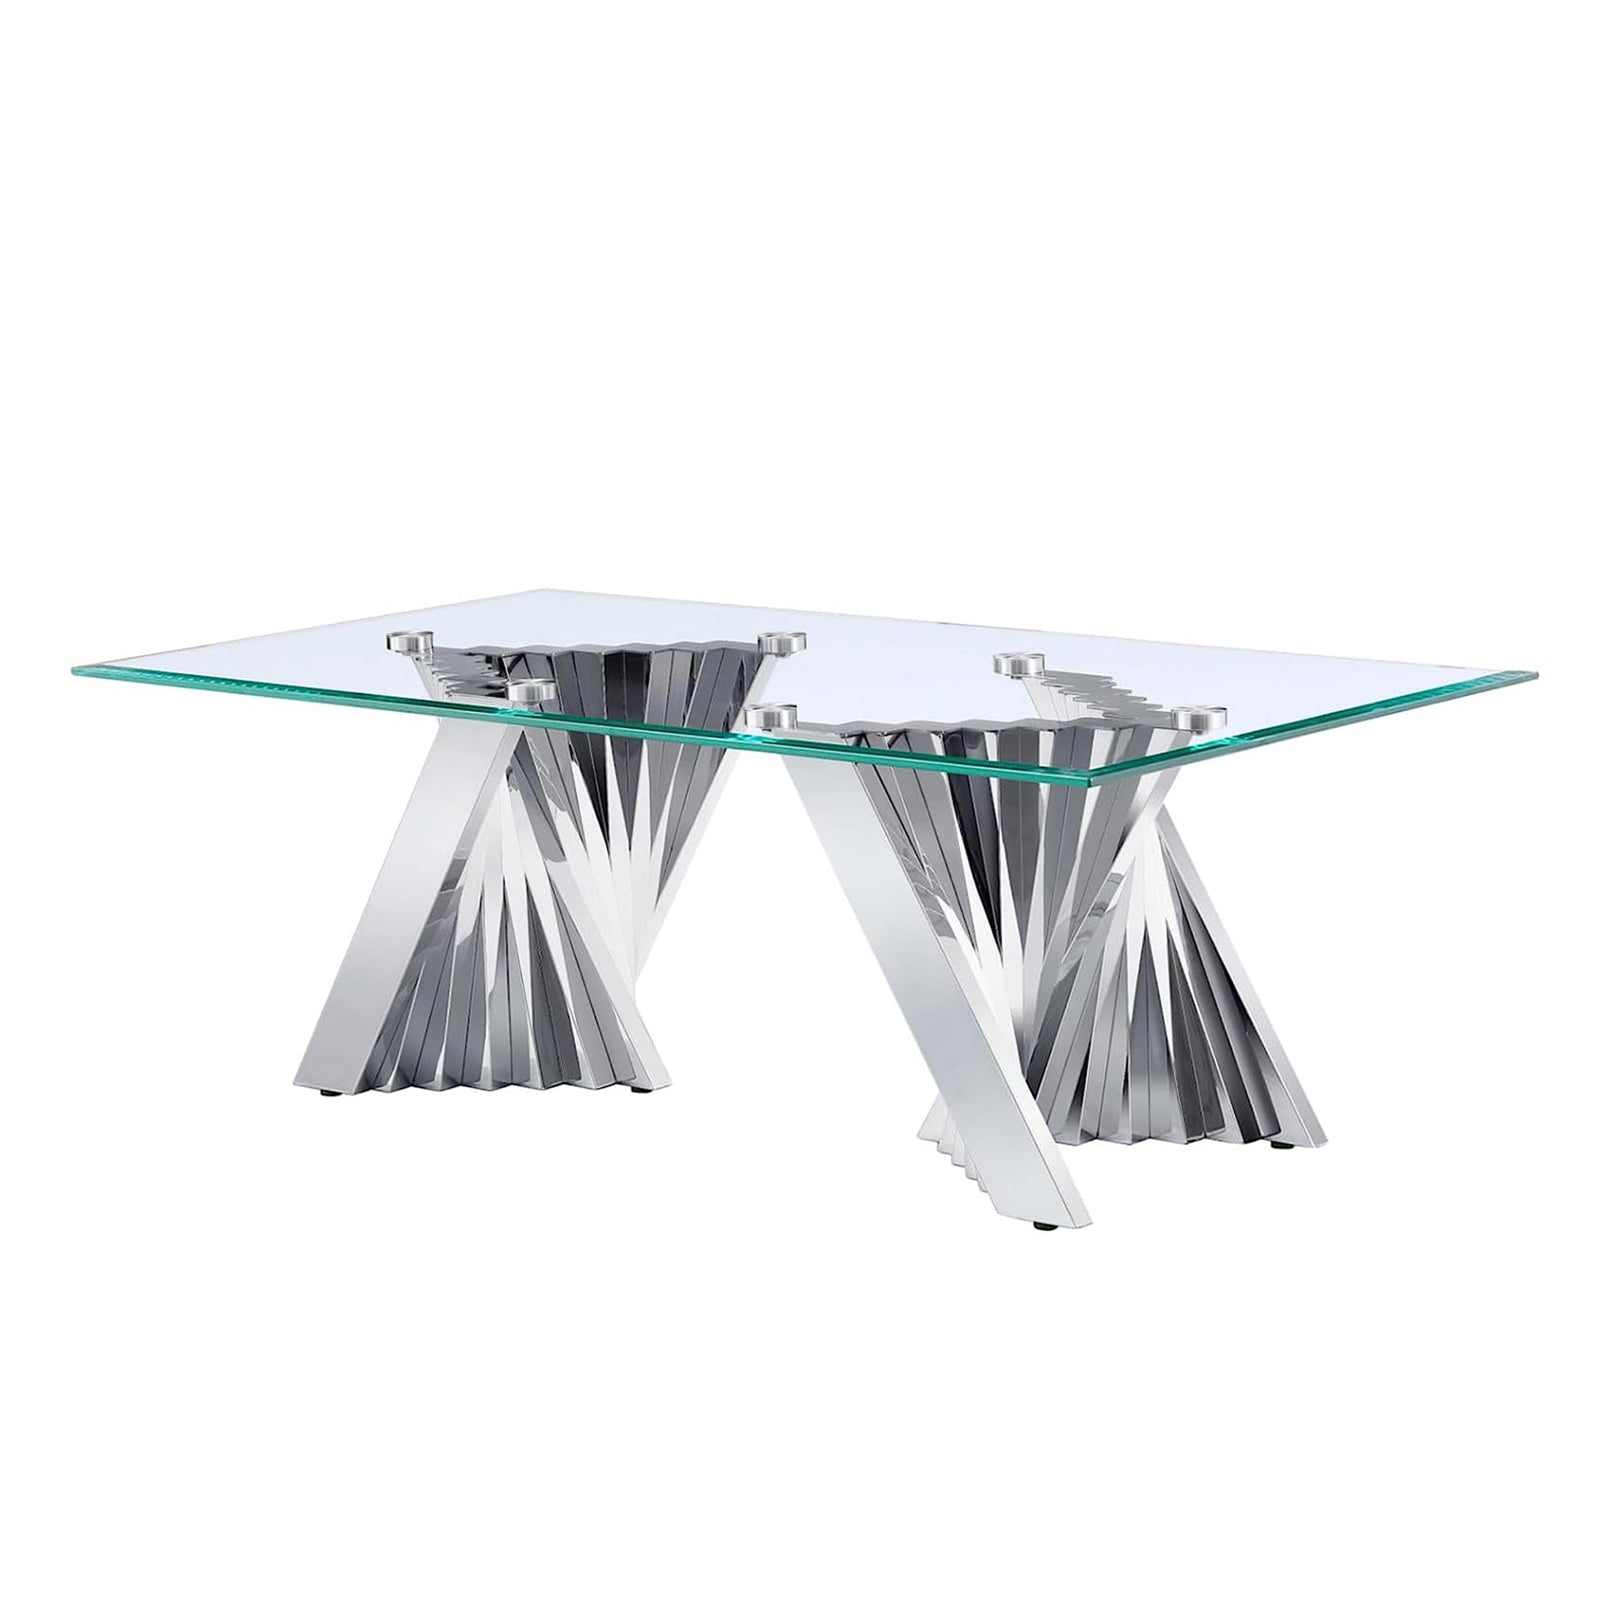 Are Tempered Glass Coffee Tables Safe?